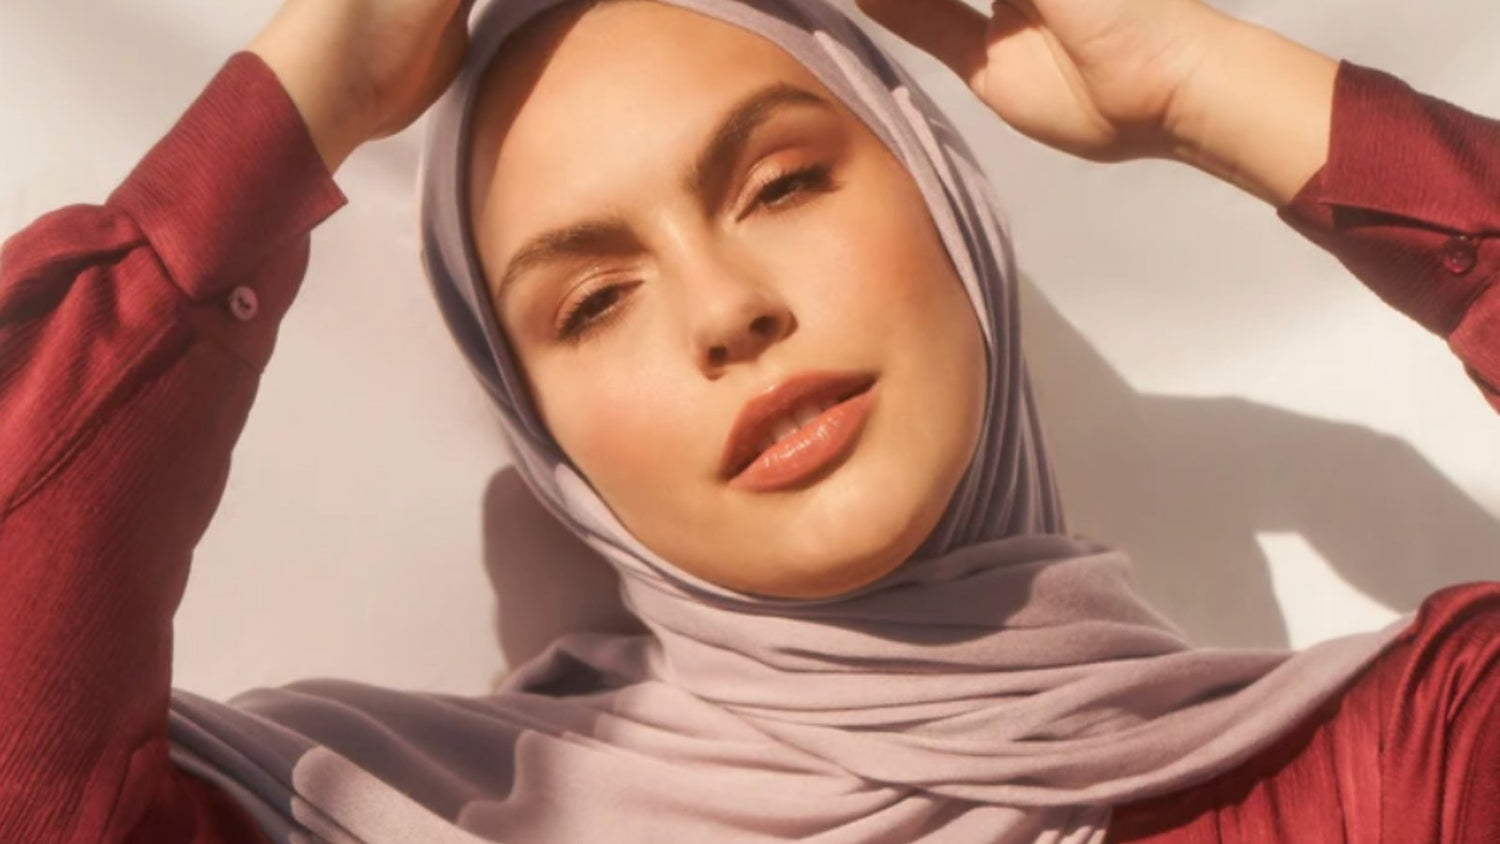 Haute Hijab - Hijabs & Accessories for the World's Most Powerful Women